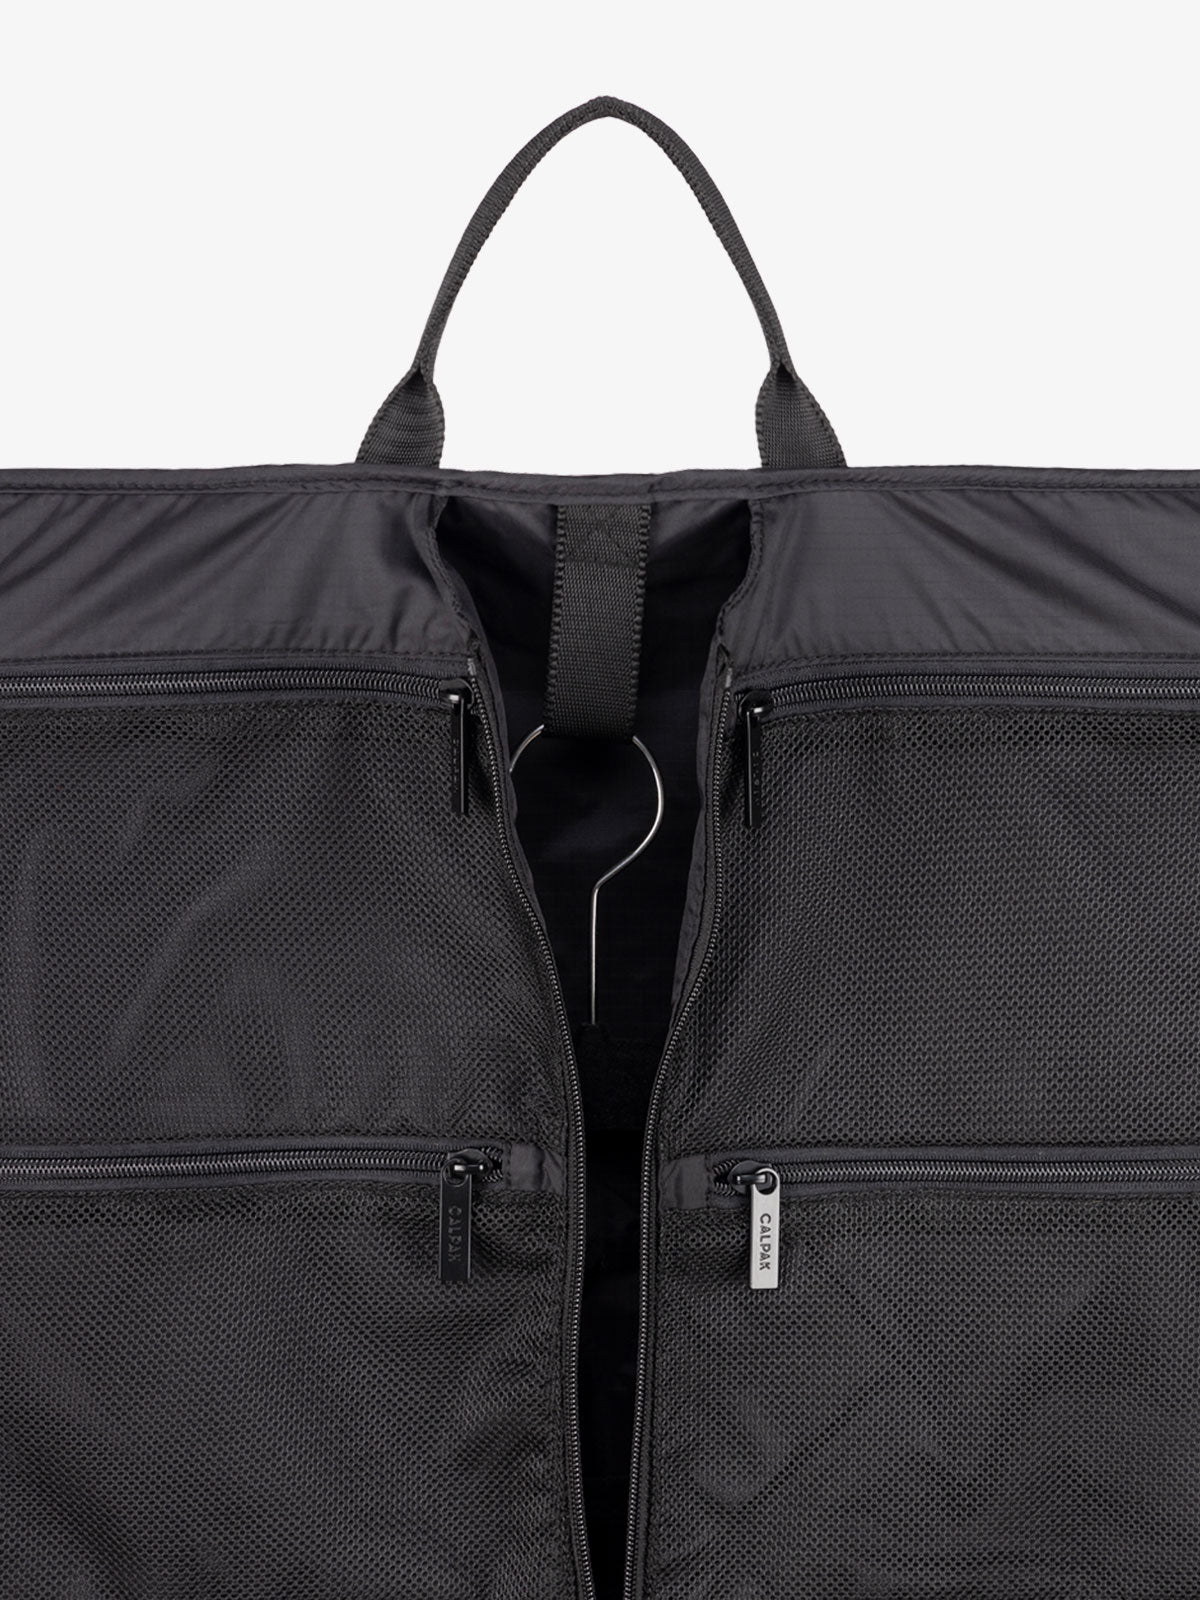 garment bag for luggage carry-on with mesh pockets